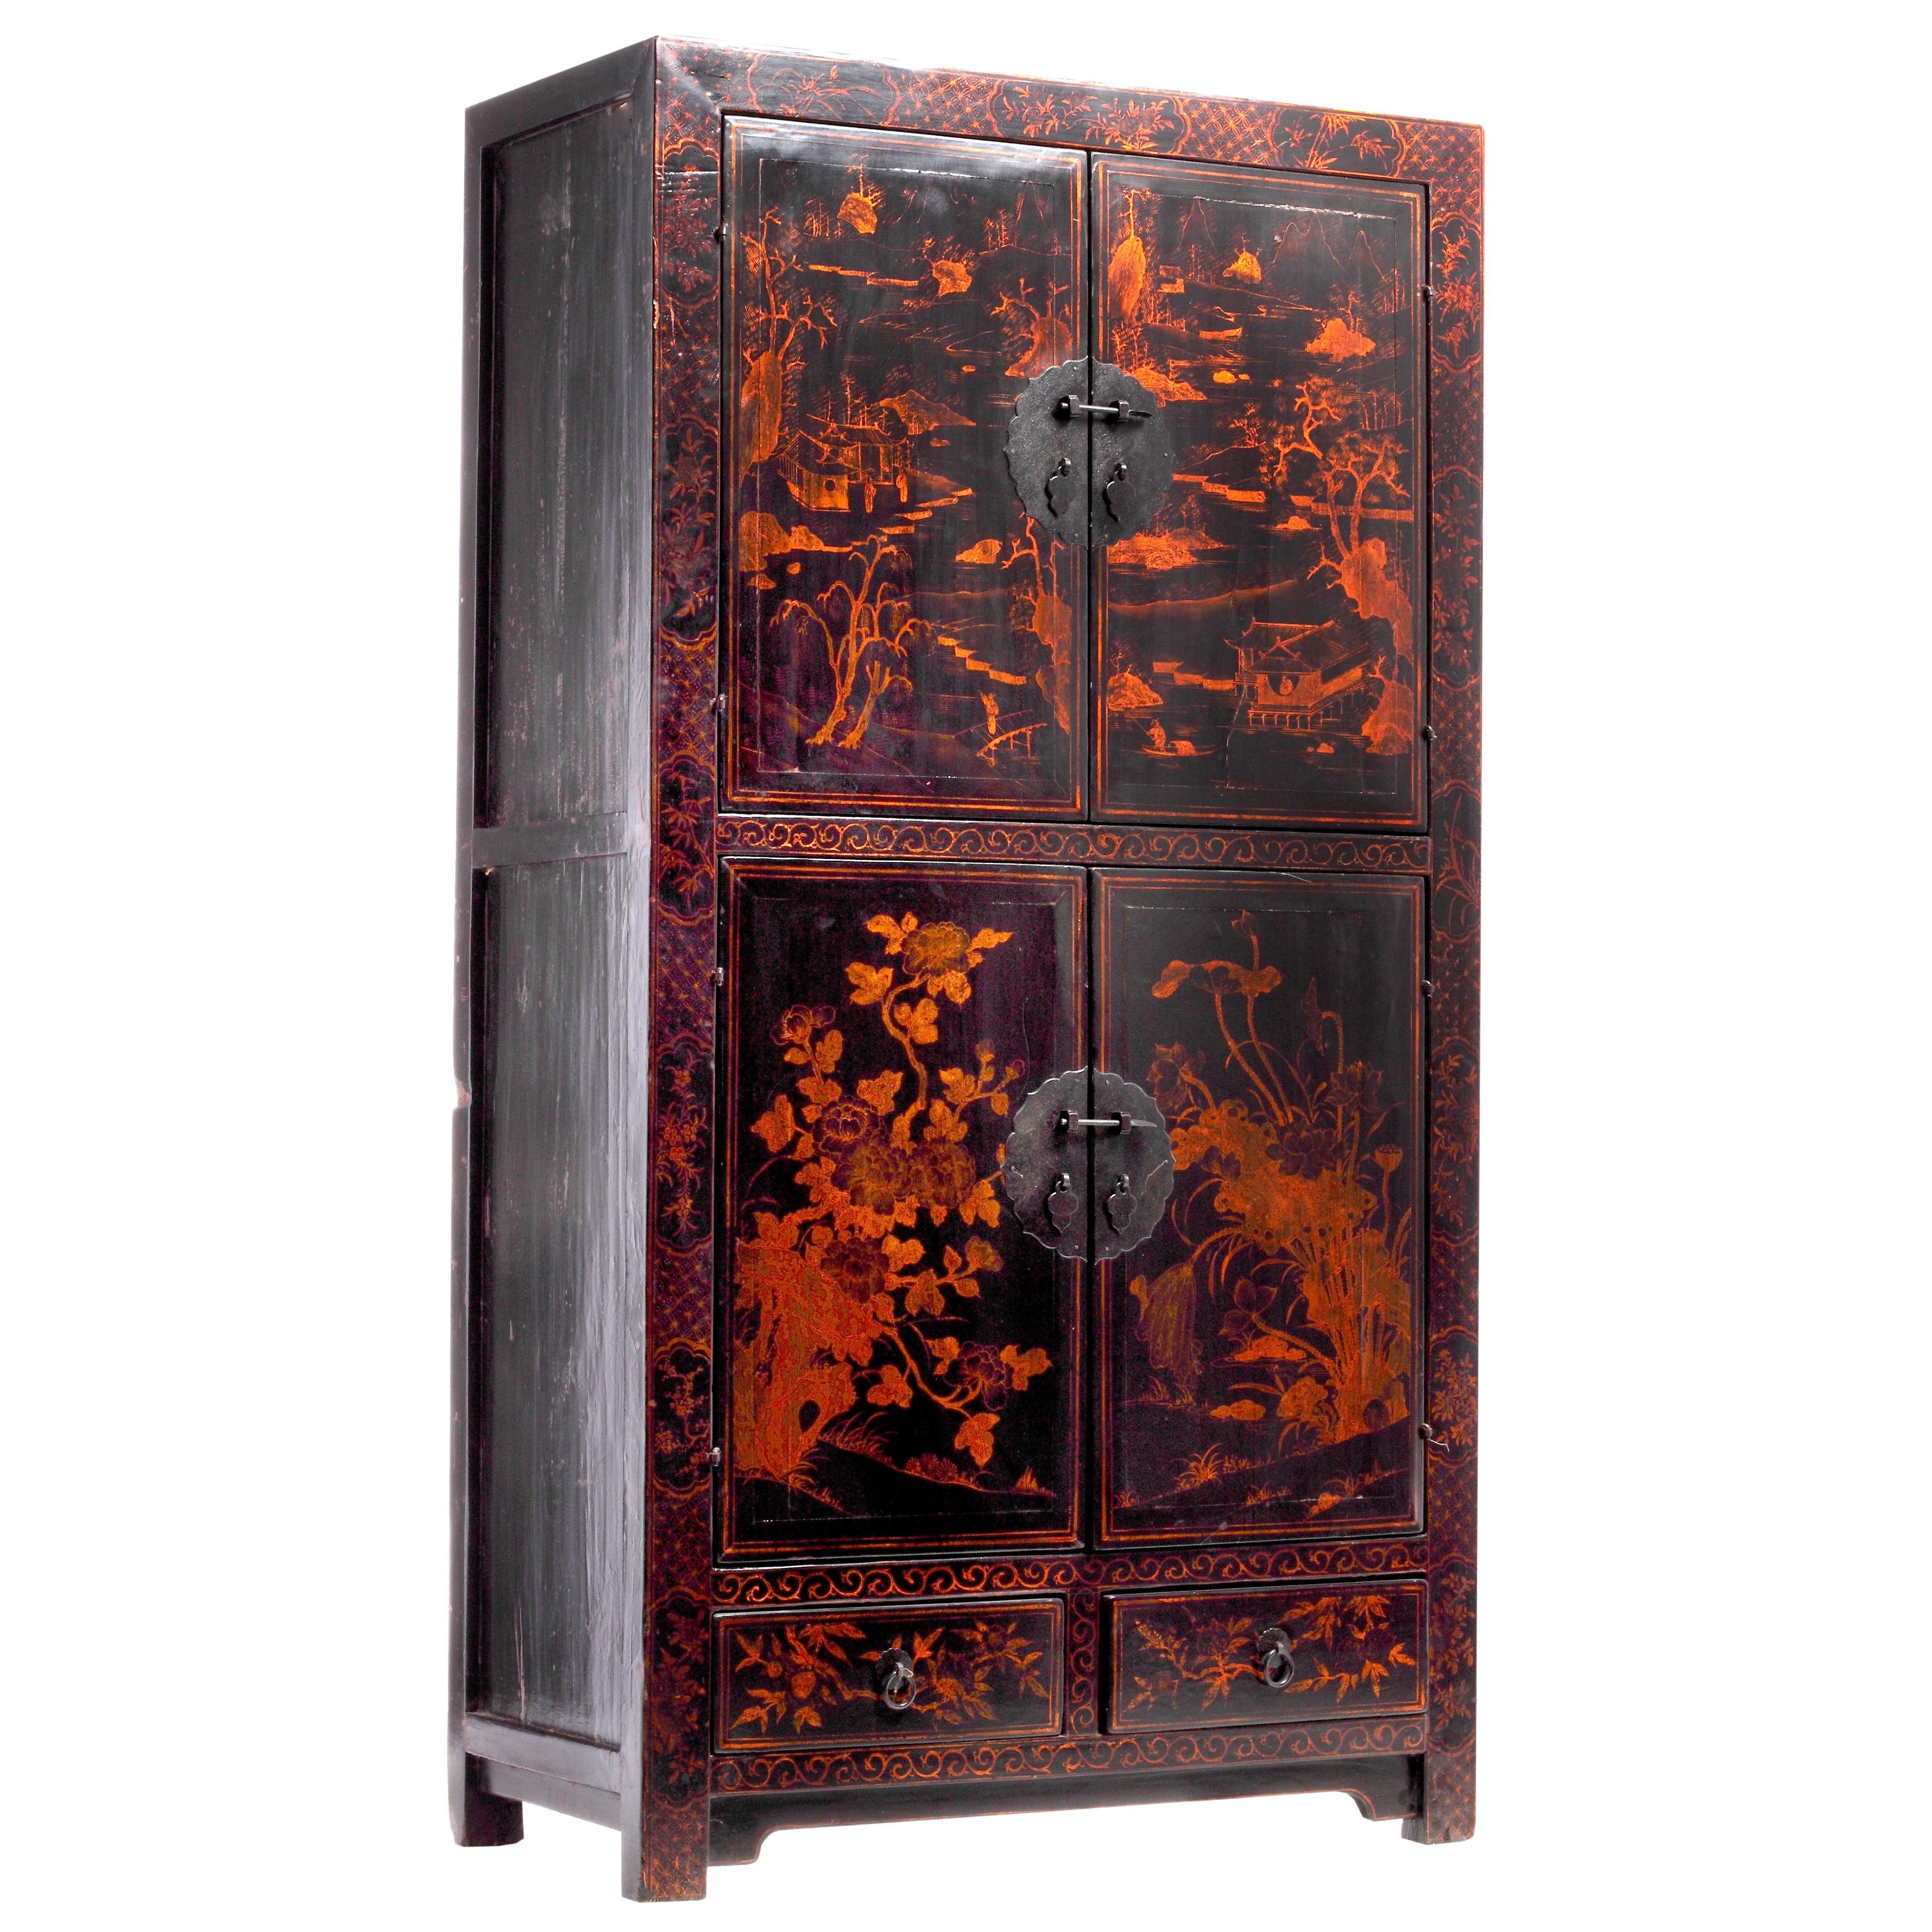 Black Lacquered Cabinet with Hand-Painted Landscape from China, 19th Century